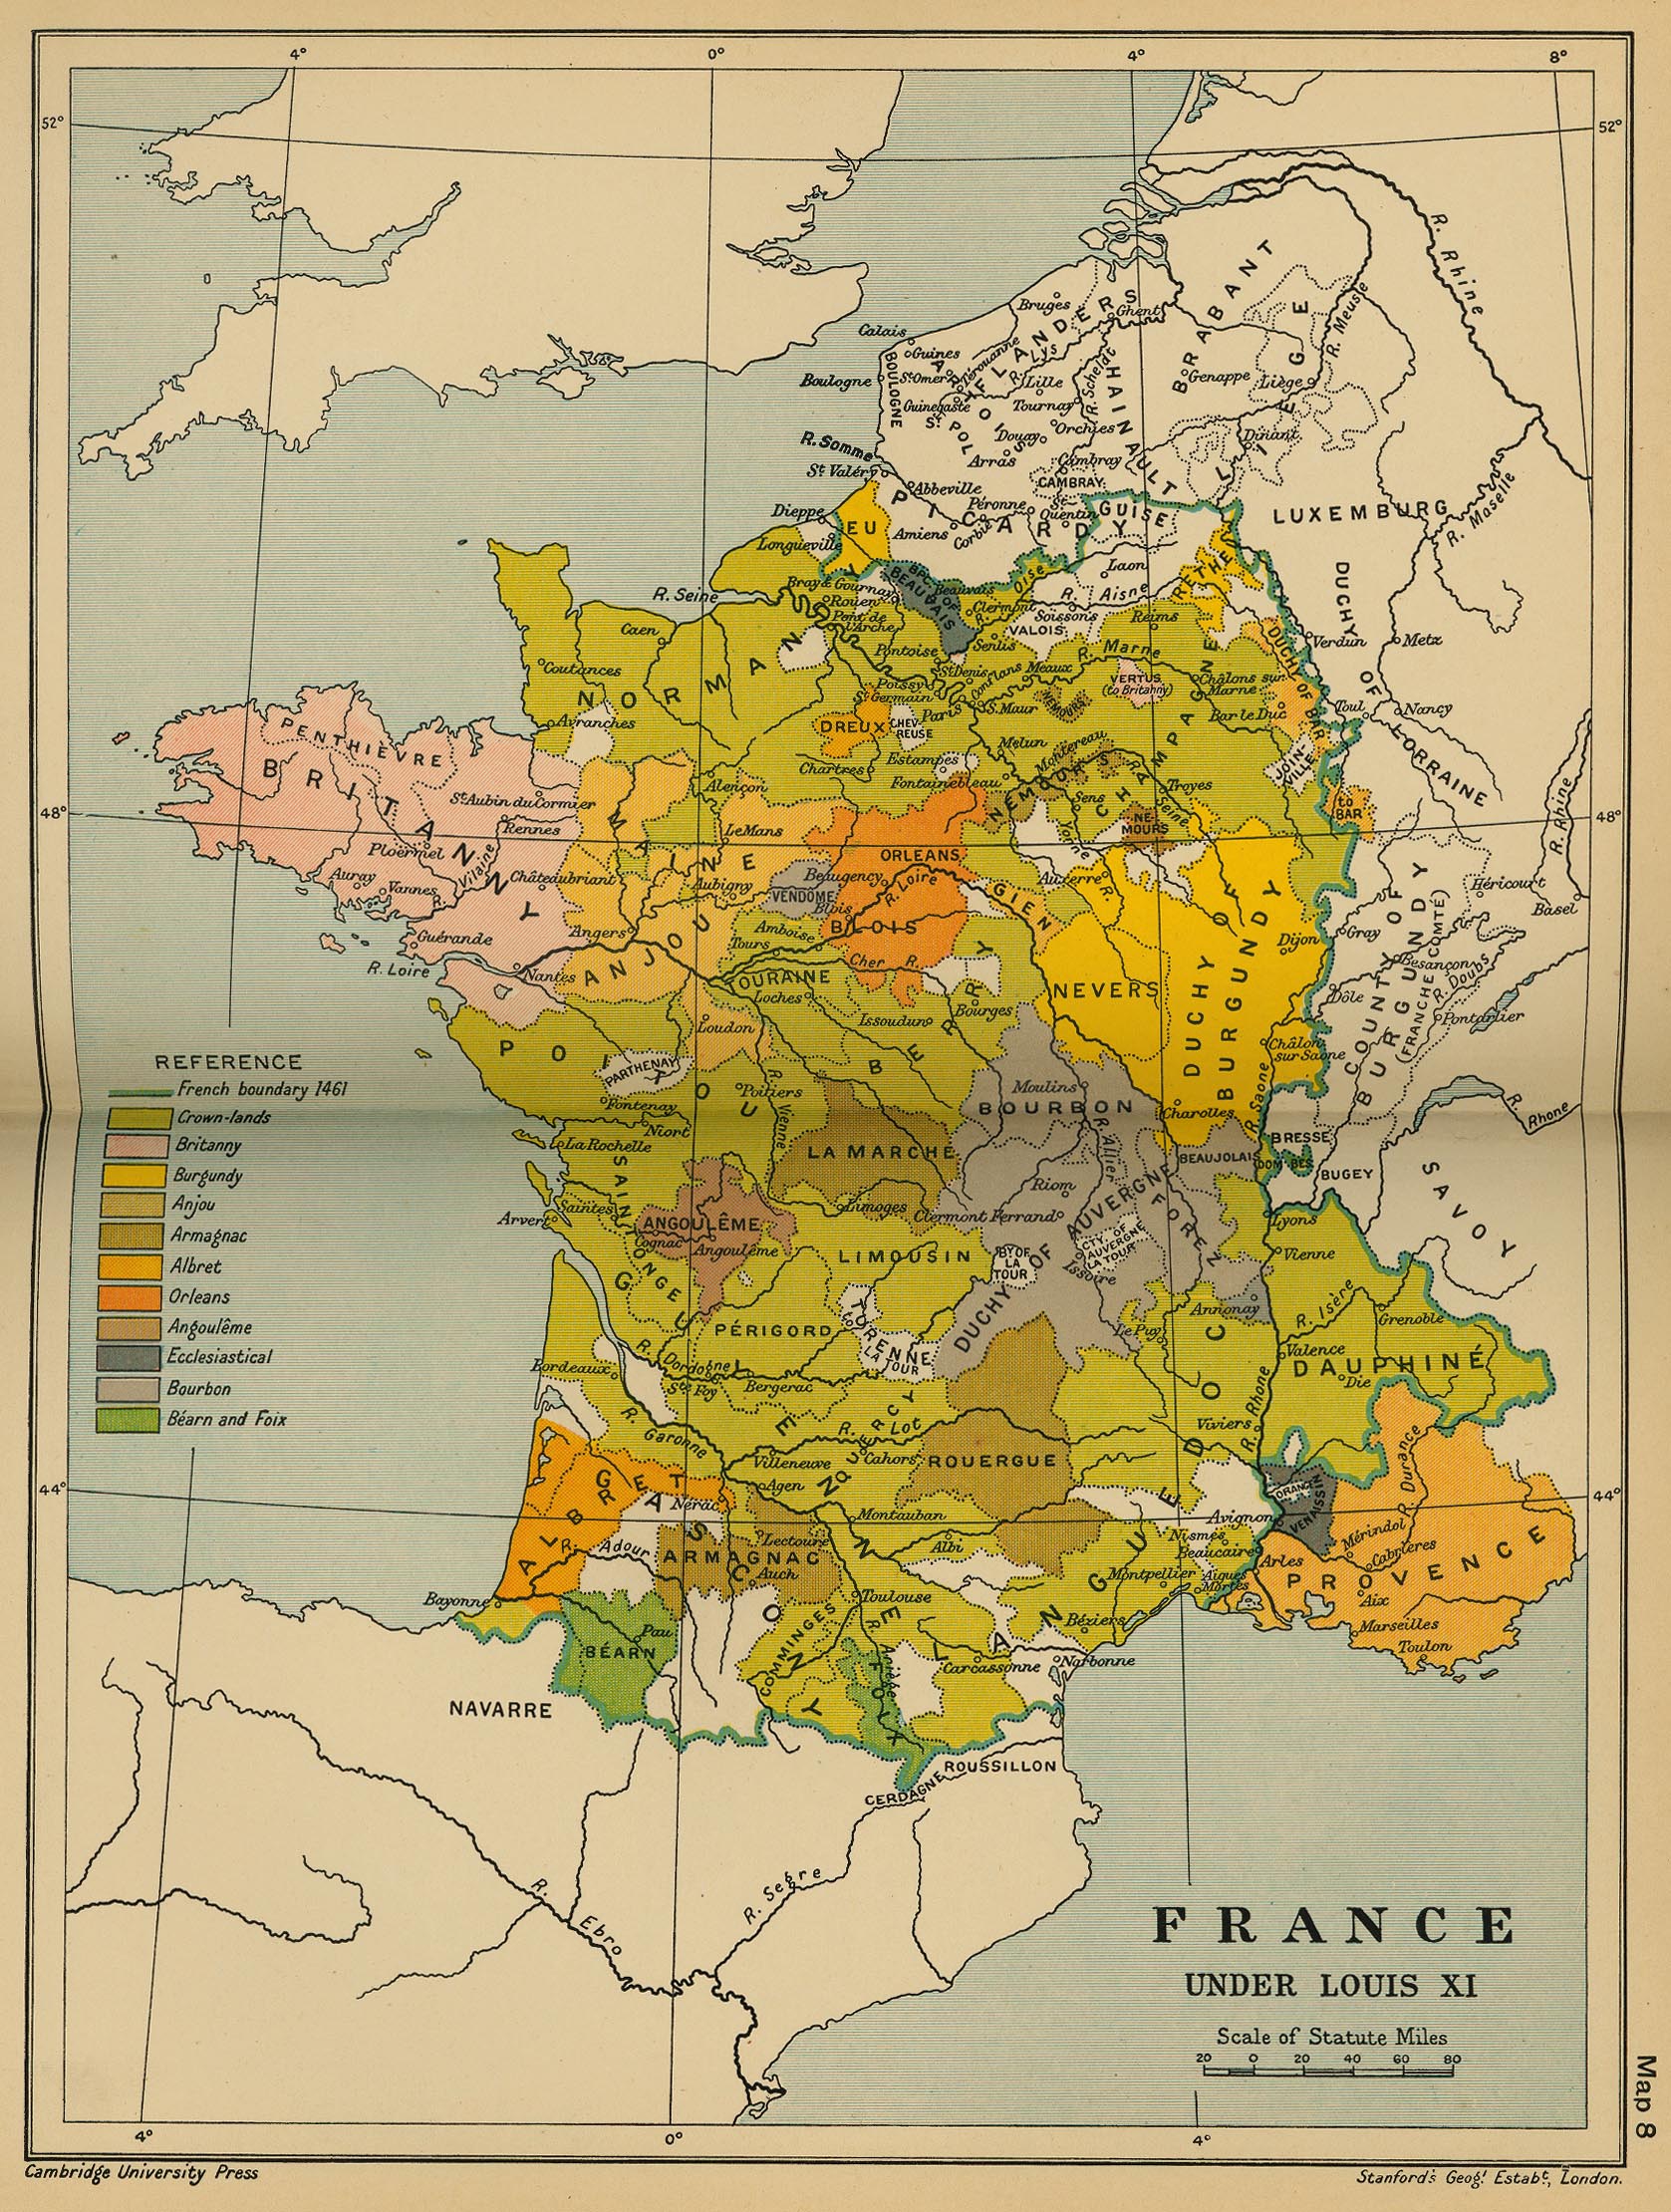 Map of France Under Louis XI, 1461 - 1483